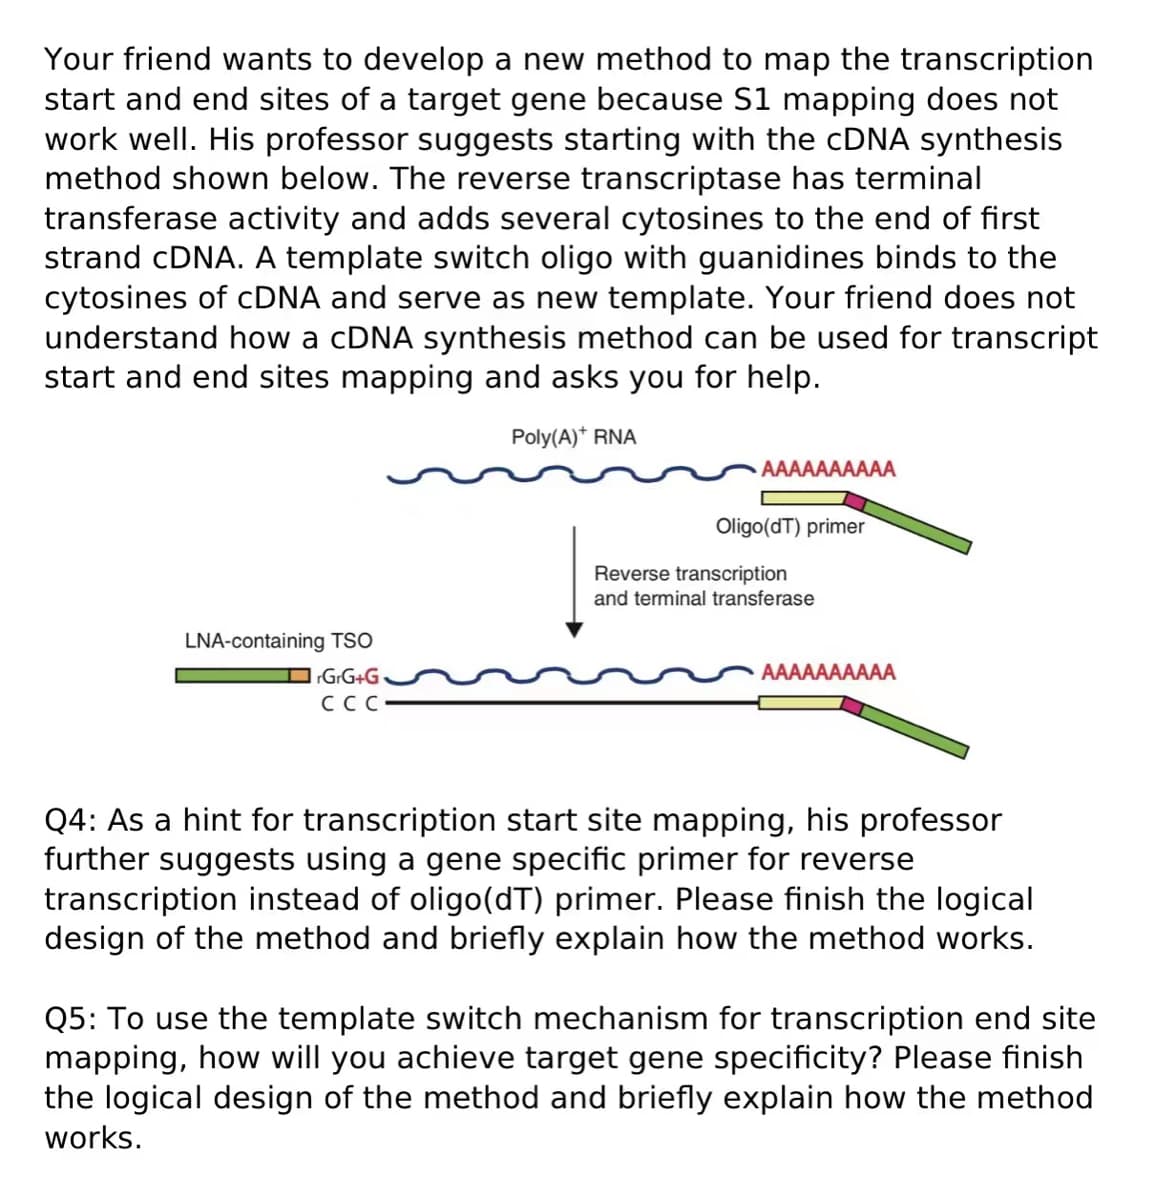 Your friend wants to develop a new method to map the transcription
start and end sites of a target gene because S1 mapping does not
work well. His professor suggests starting with the cDNA synthesis
method shown below. The reverse transcriptase has terminal
transferase activity and adds several cytosines to the end of first
strand cDNA. A template switch oligo with guanidines binds to the
cytosines of cDNA and serve as new template. Your friend does not
understand how a cDNA synthesis method can be used for transcript
start and end sites mapping and asks you for help.
LNA-containing TSO
GrG+G
CCC
Poly(A)* RNA
AAAAAAAAAA
Oligo(dT) primer
Reverse transcription
and terminal transferase
AAAAAAAAAA
Q4: As a hint for transcription start site mapping, his professor
further suggests using a gene specific primer for reverse
transcription instead of oligo(dT) primer. Please finish the logical
design of the method and briefly explain how the method works.
Q5: To use the template switch mechanism for transcription end site
mapping, how will you achieve target gene specificity? Please finish
the logical design of the method and briefly explain how the method
works.